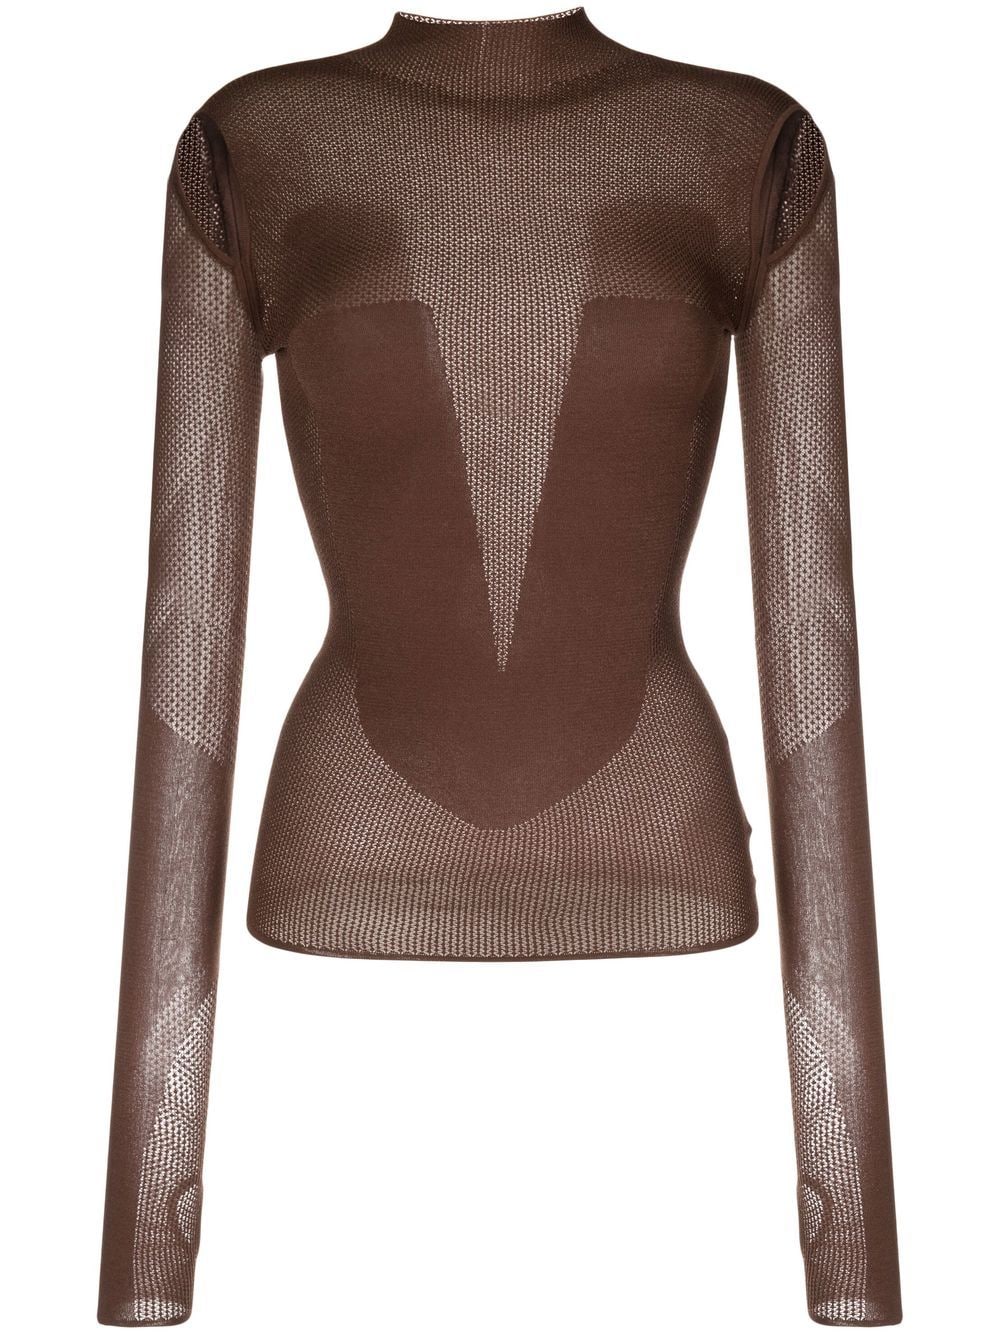 Dion Lee cut out-detail knitted top - Brown